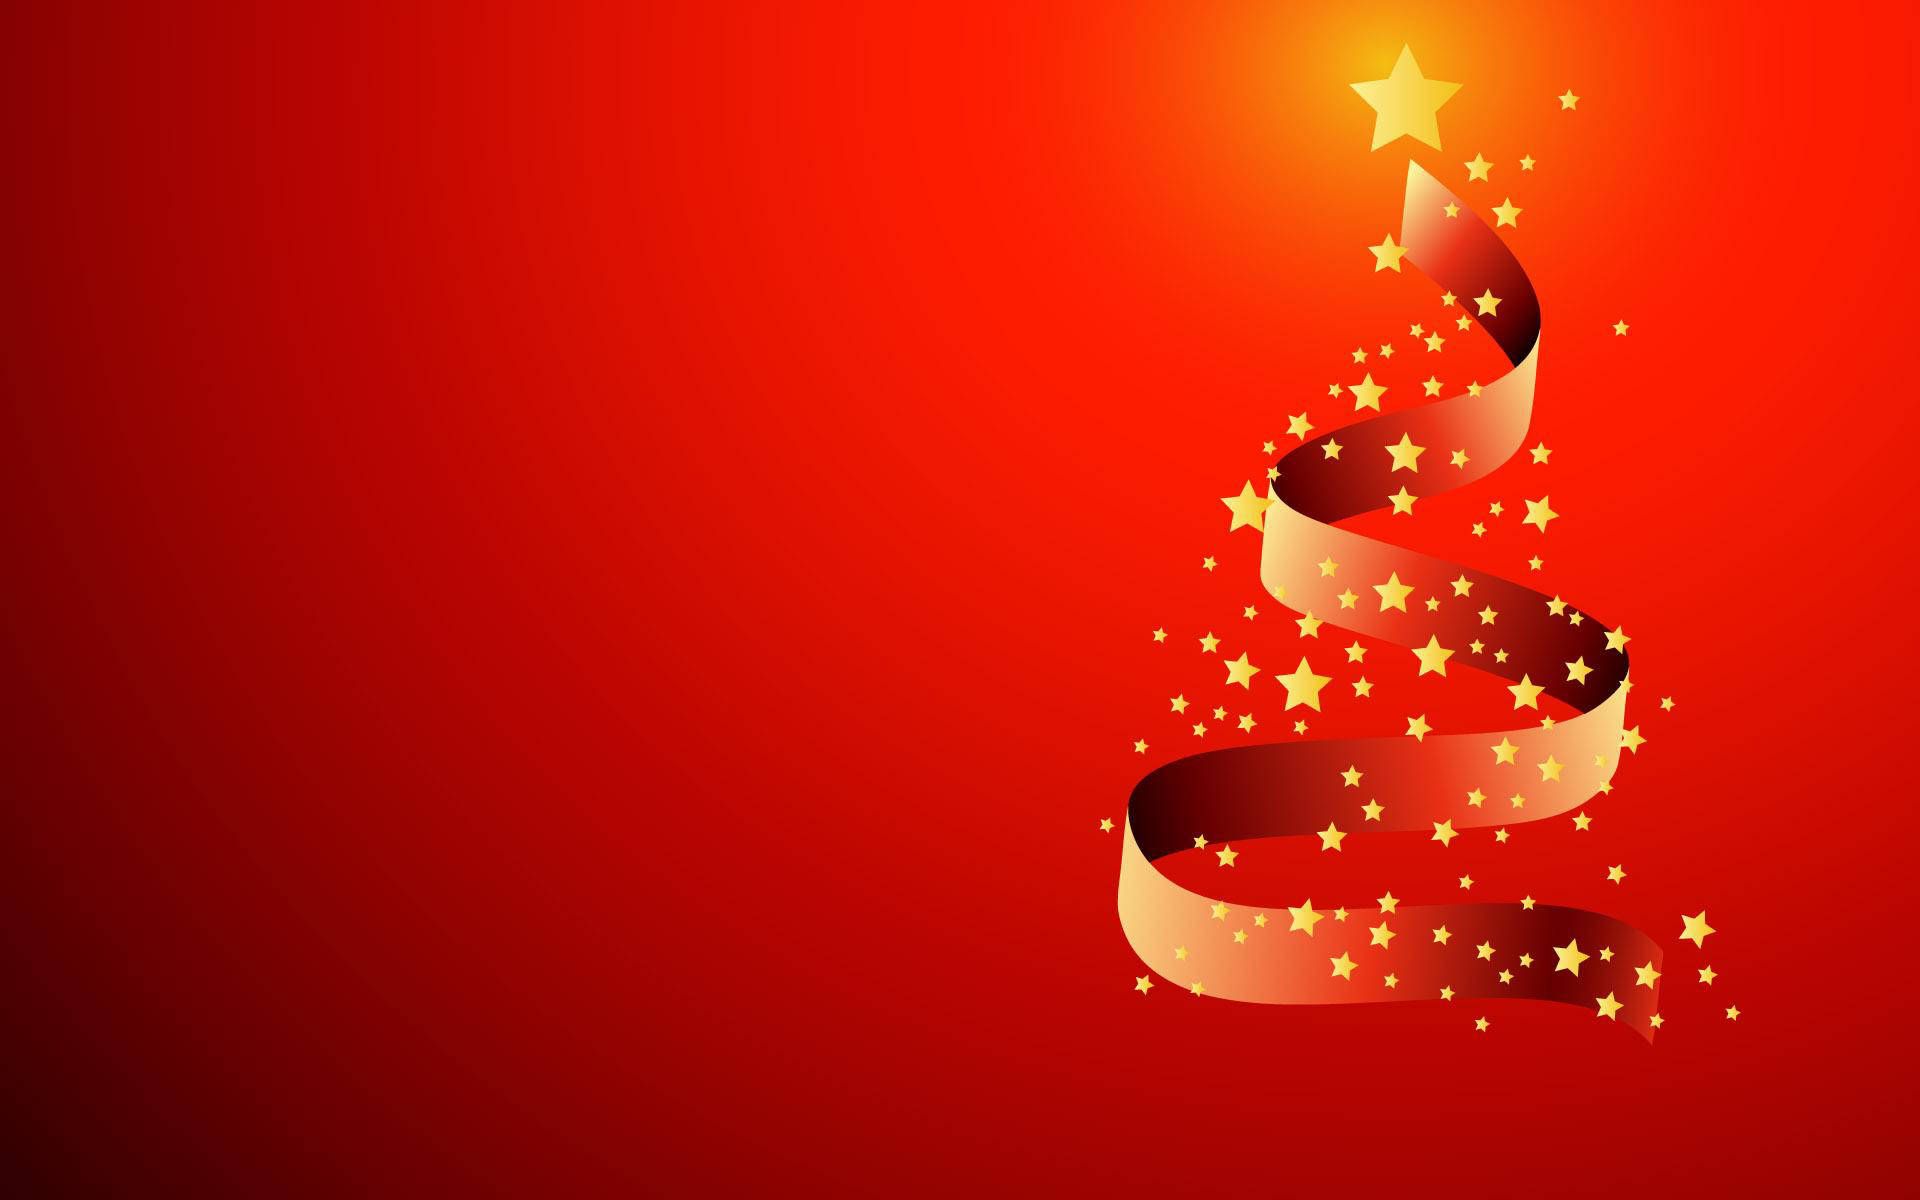 Christmas Wallpaper Backgrounds - HD Wallpapers Backgrounds of ...